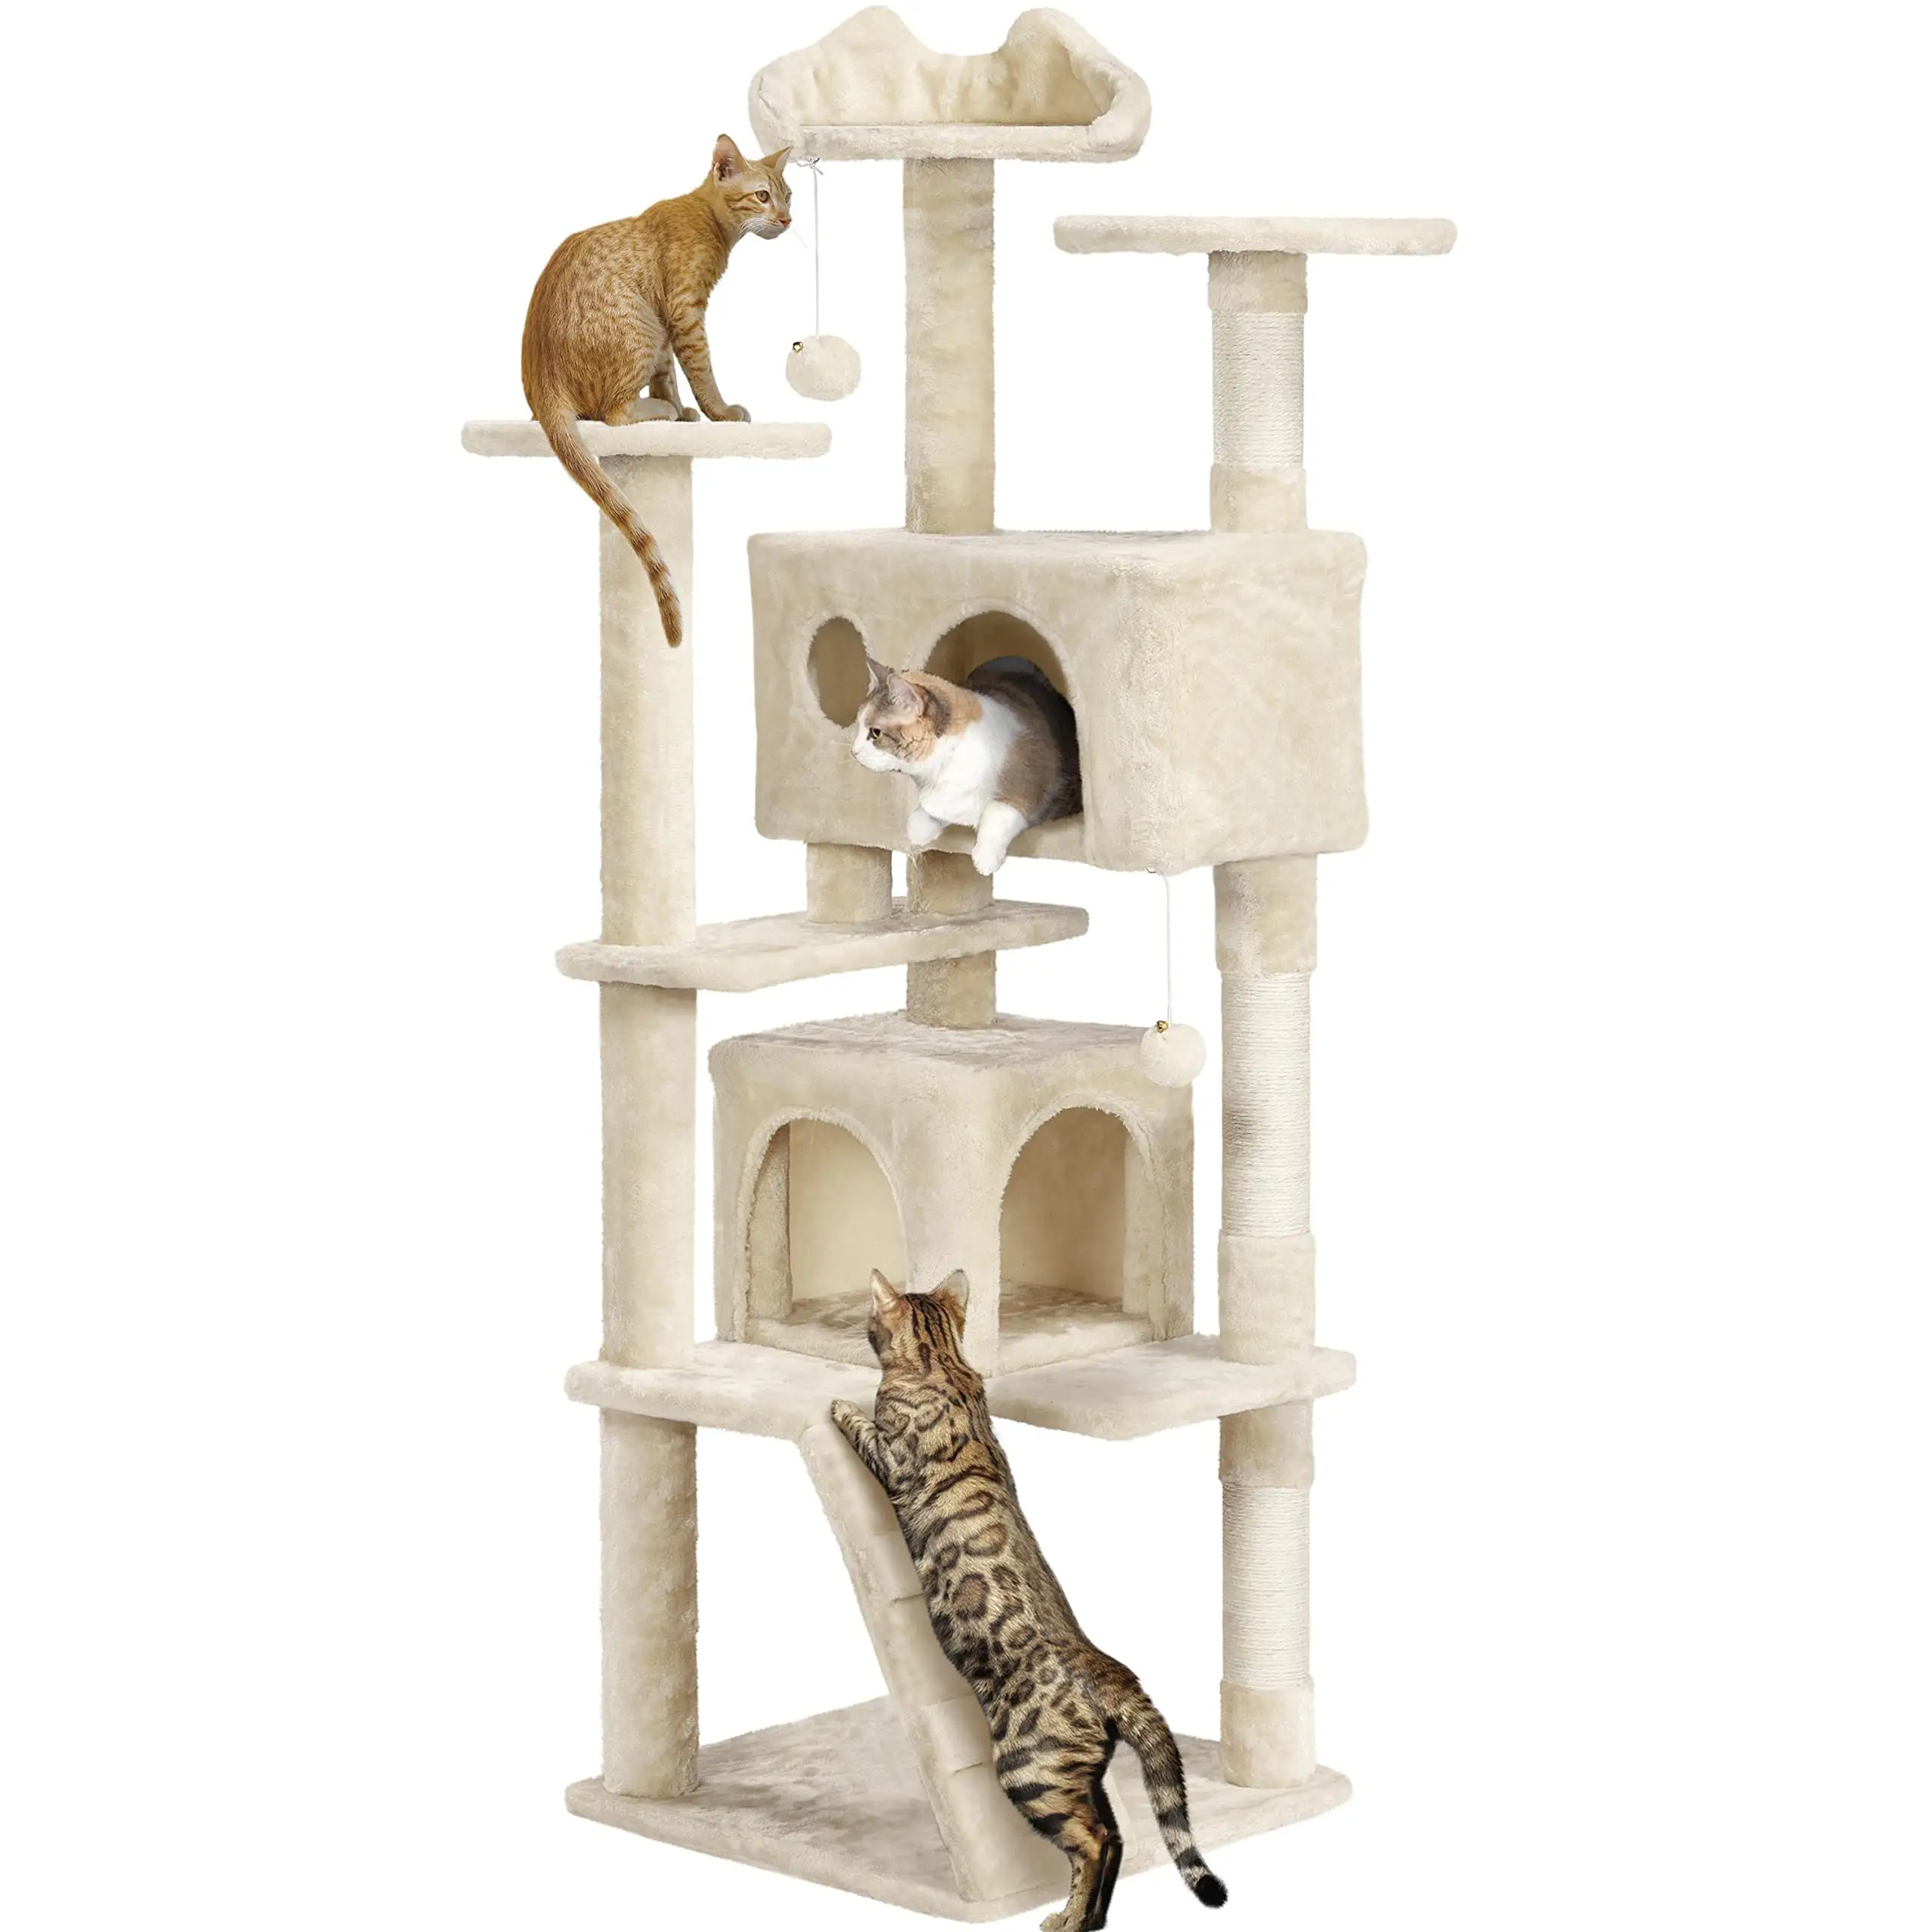 54in Cat Tree Tower Condo Furniture cat scratcher Post for Kittens Pet House Play cat trees   scratcher